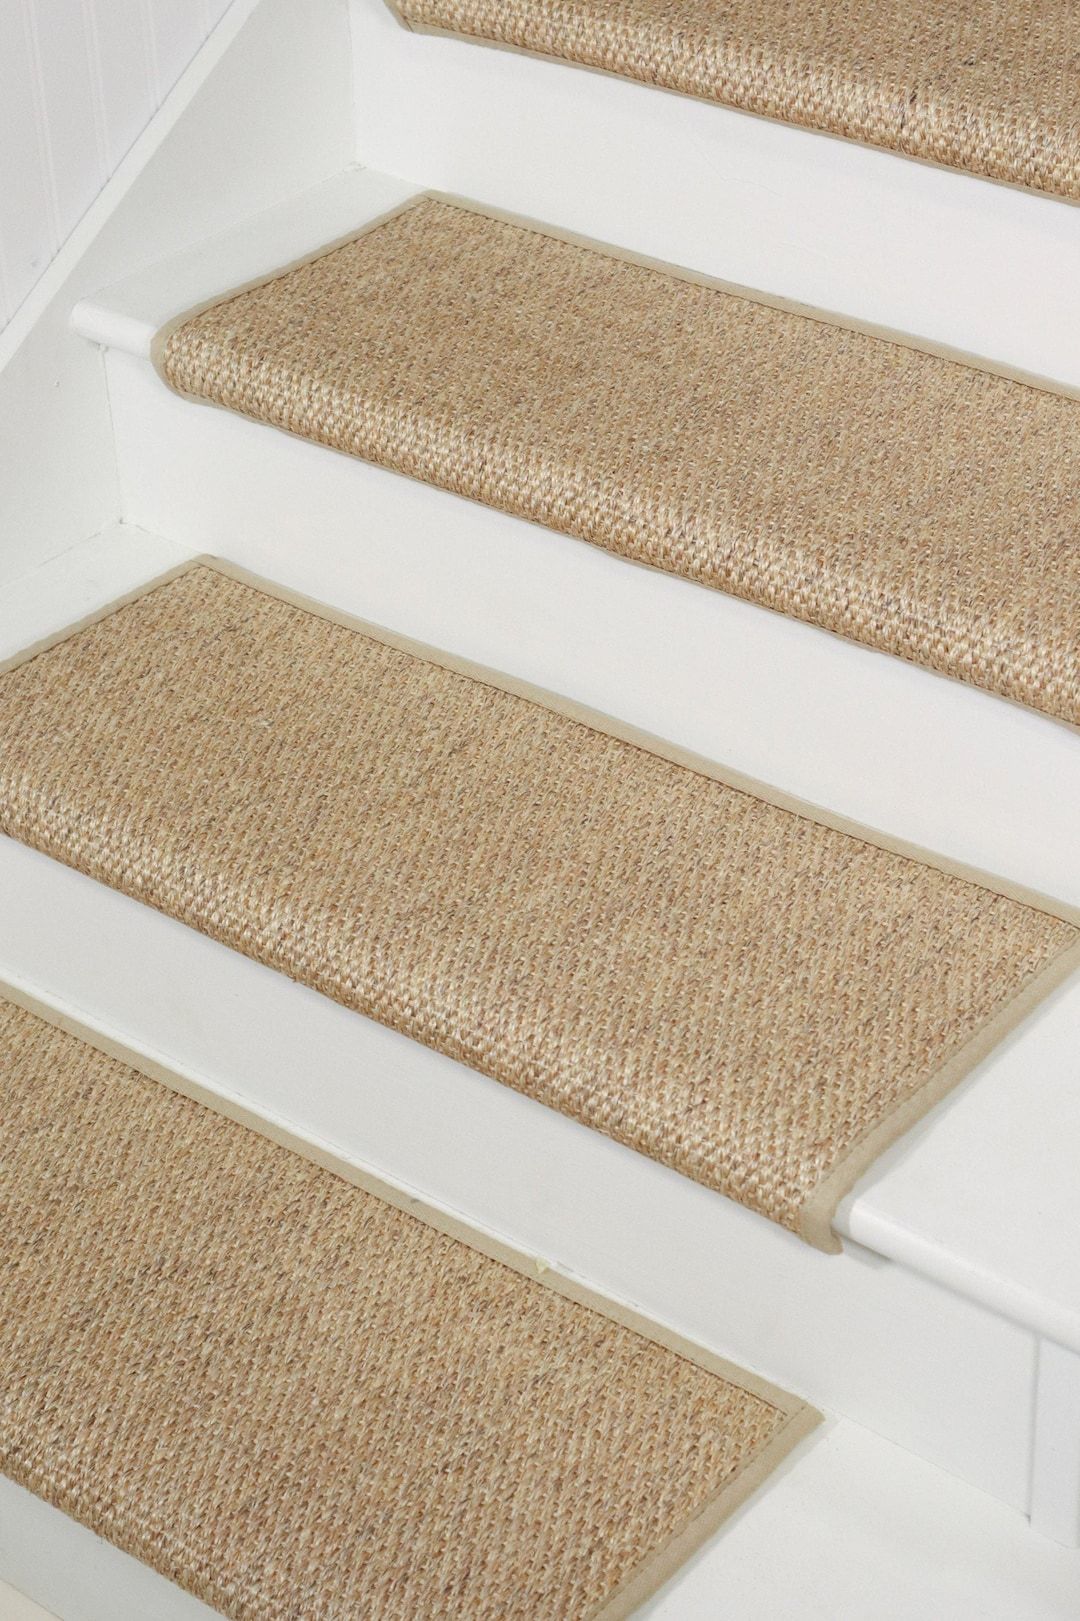 DIY Tips for Cleaning and Maintaining
Carpeted Stairs